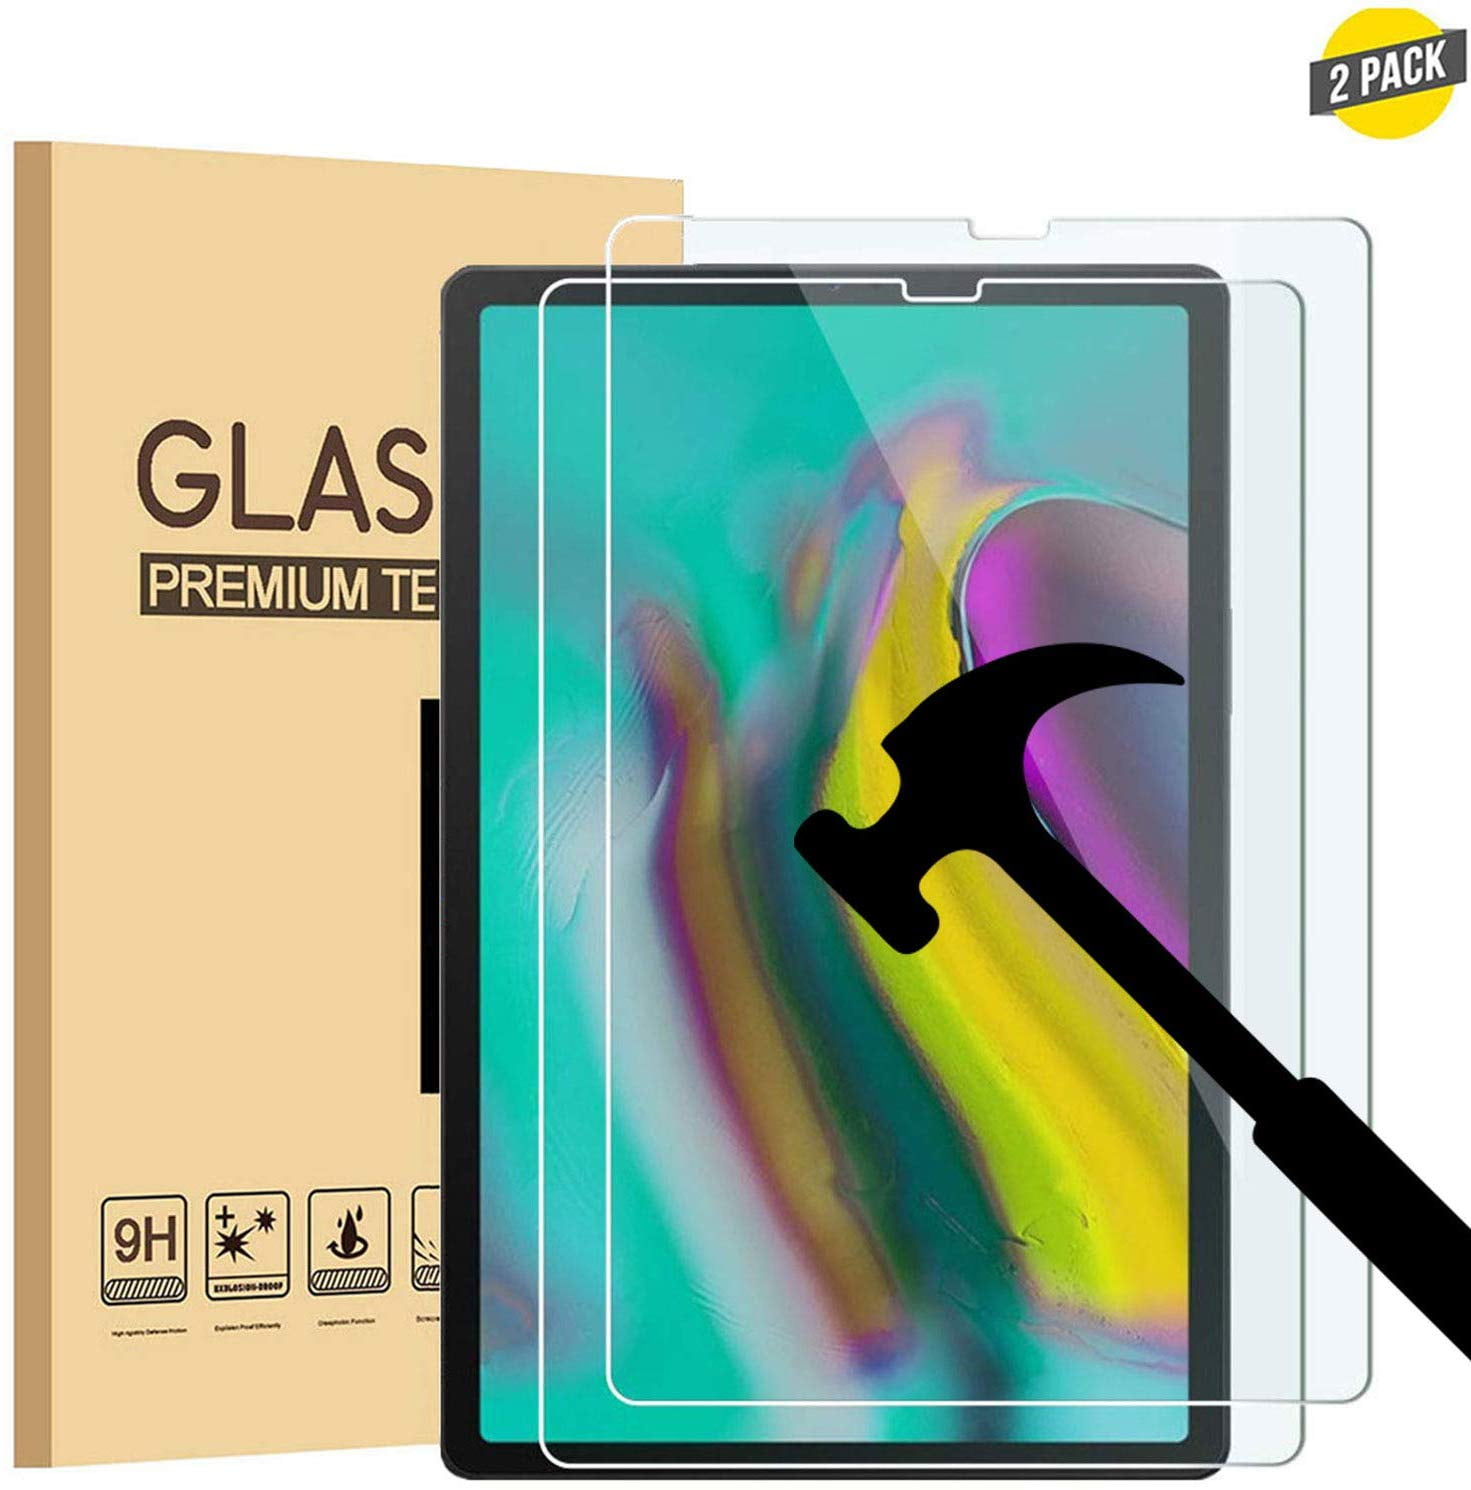 Herstellen Trolley Hangen 2 Pack] EpicGadget for Galaxy Tab S6 10.5" (SM-T860/865) 2019 Screen  Protector, 9H Scratch Resistant Bubble Free Tempered Glass Screen Protector  for Samsung Galaxy Tab S6 10.5 Tablet Released 2019 - Walmart.com